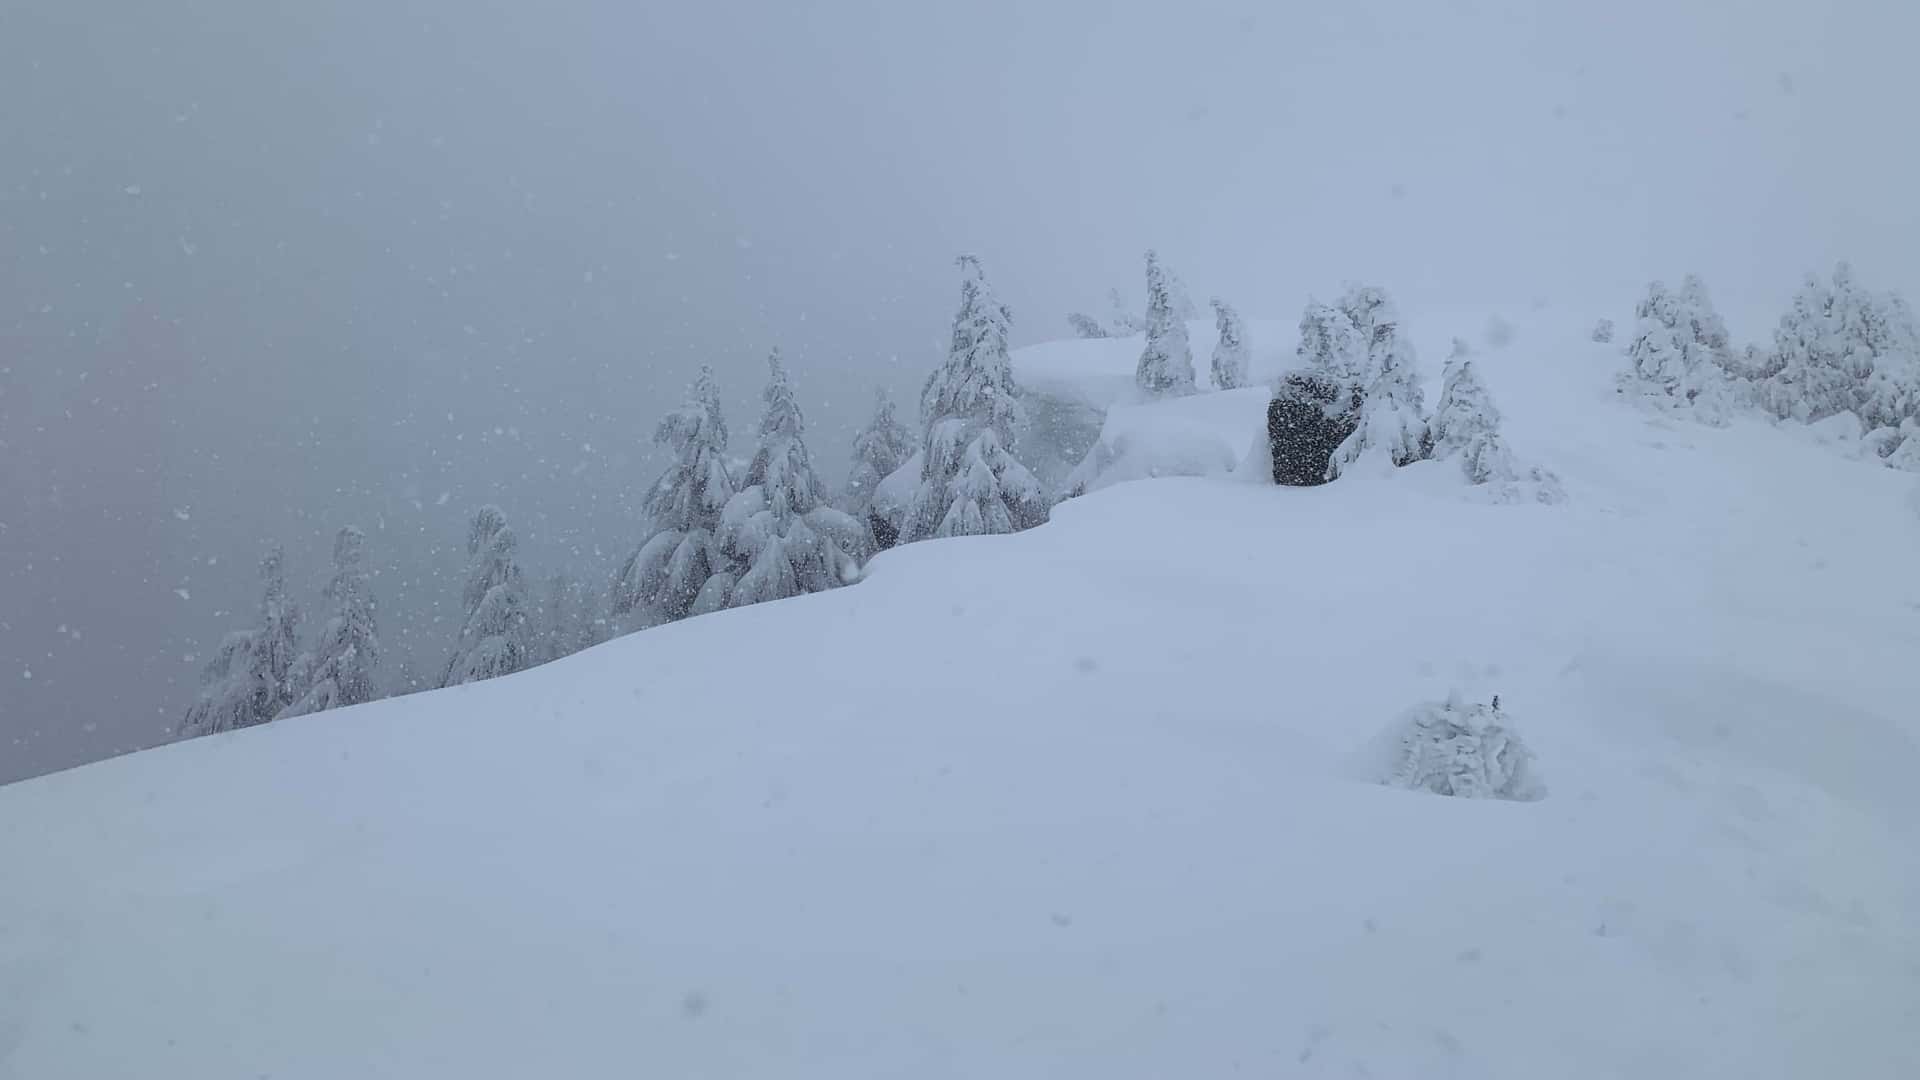 west side of Mailbox Peak in the winter